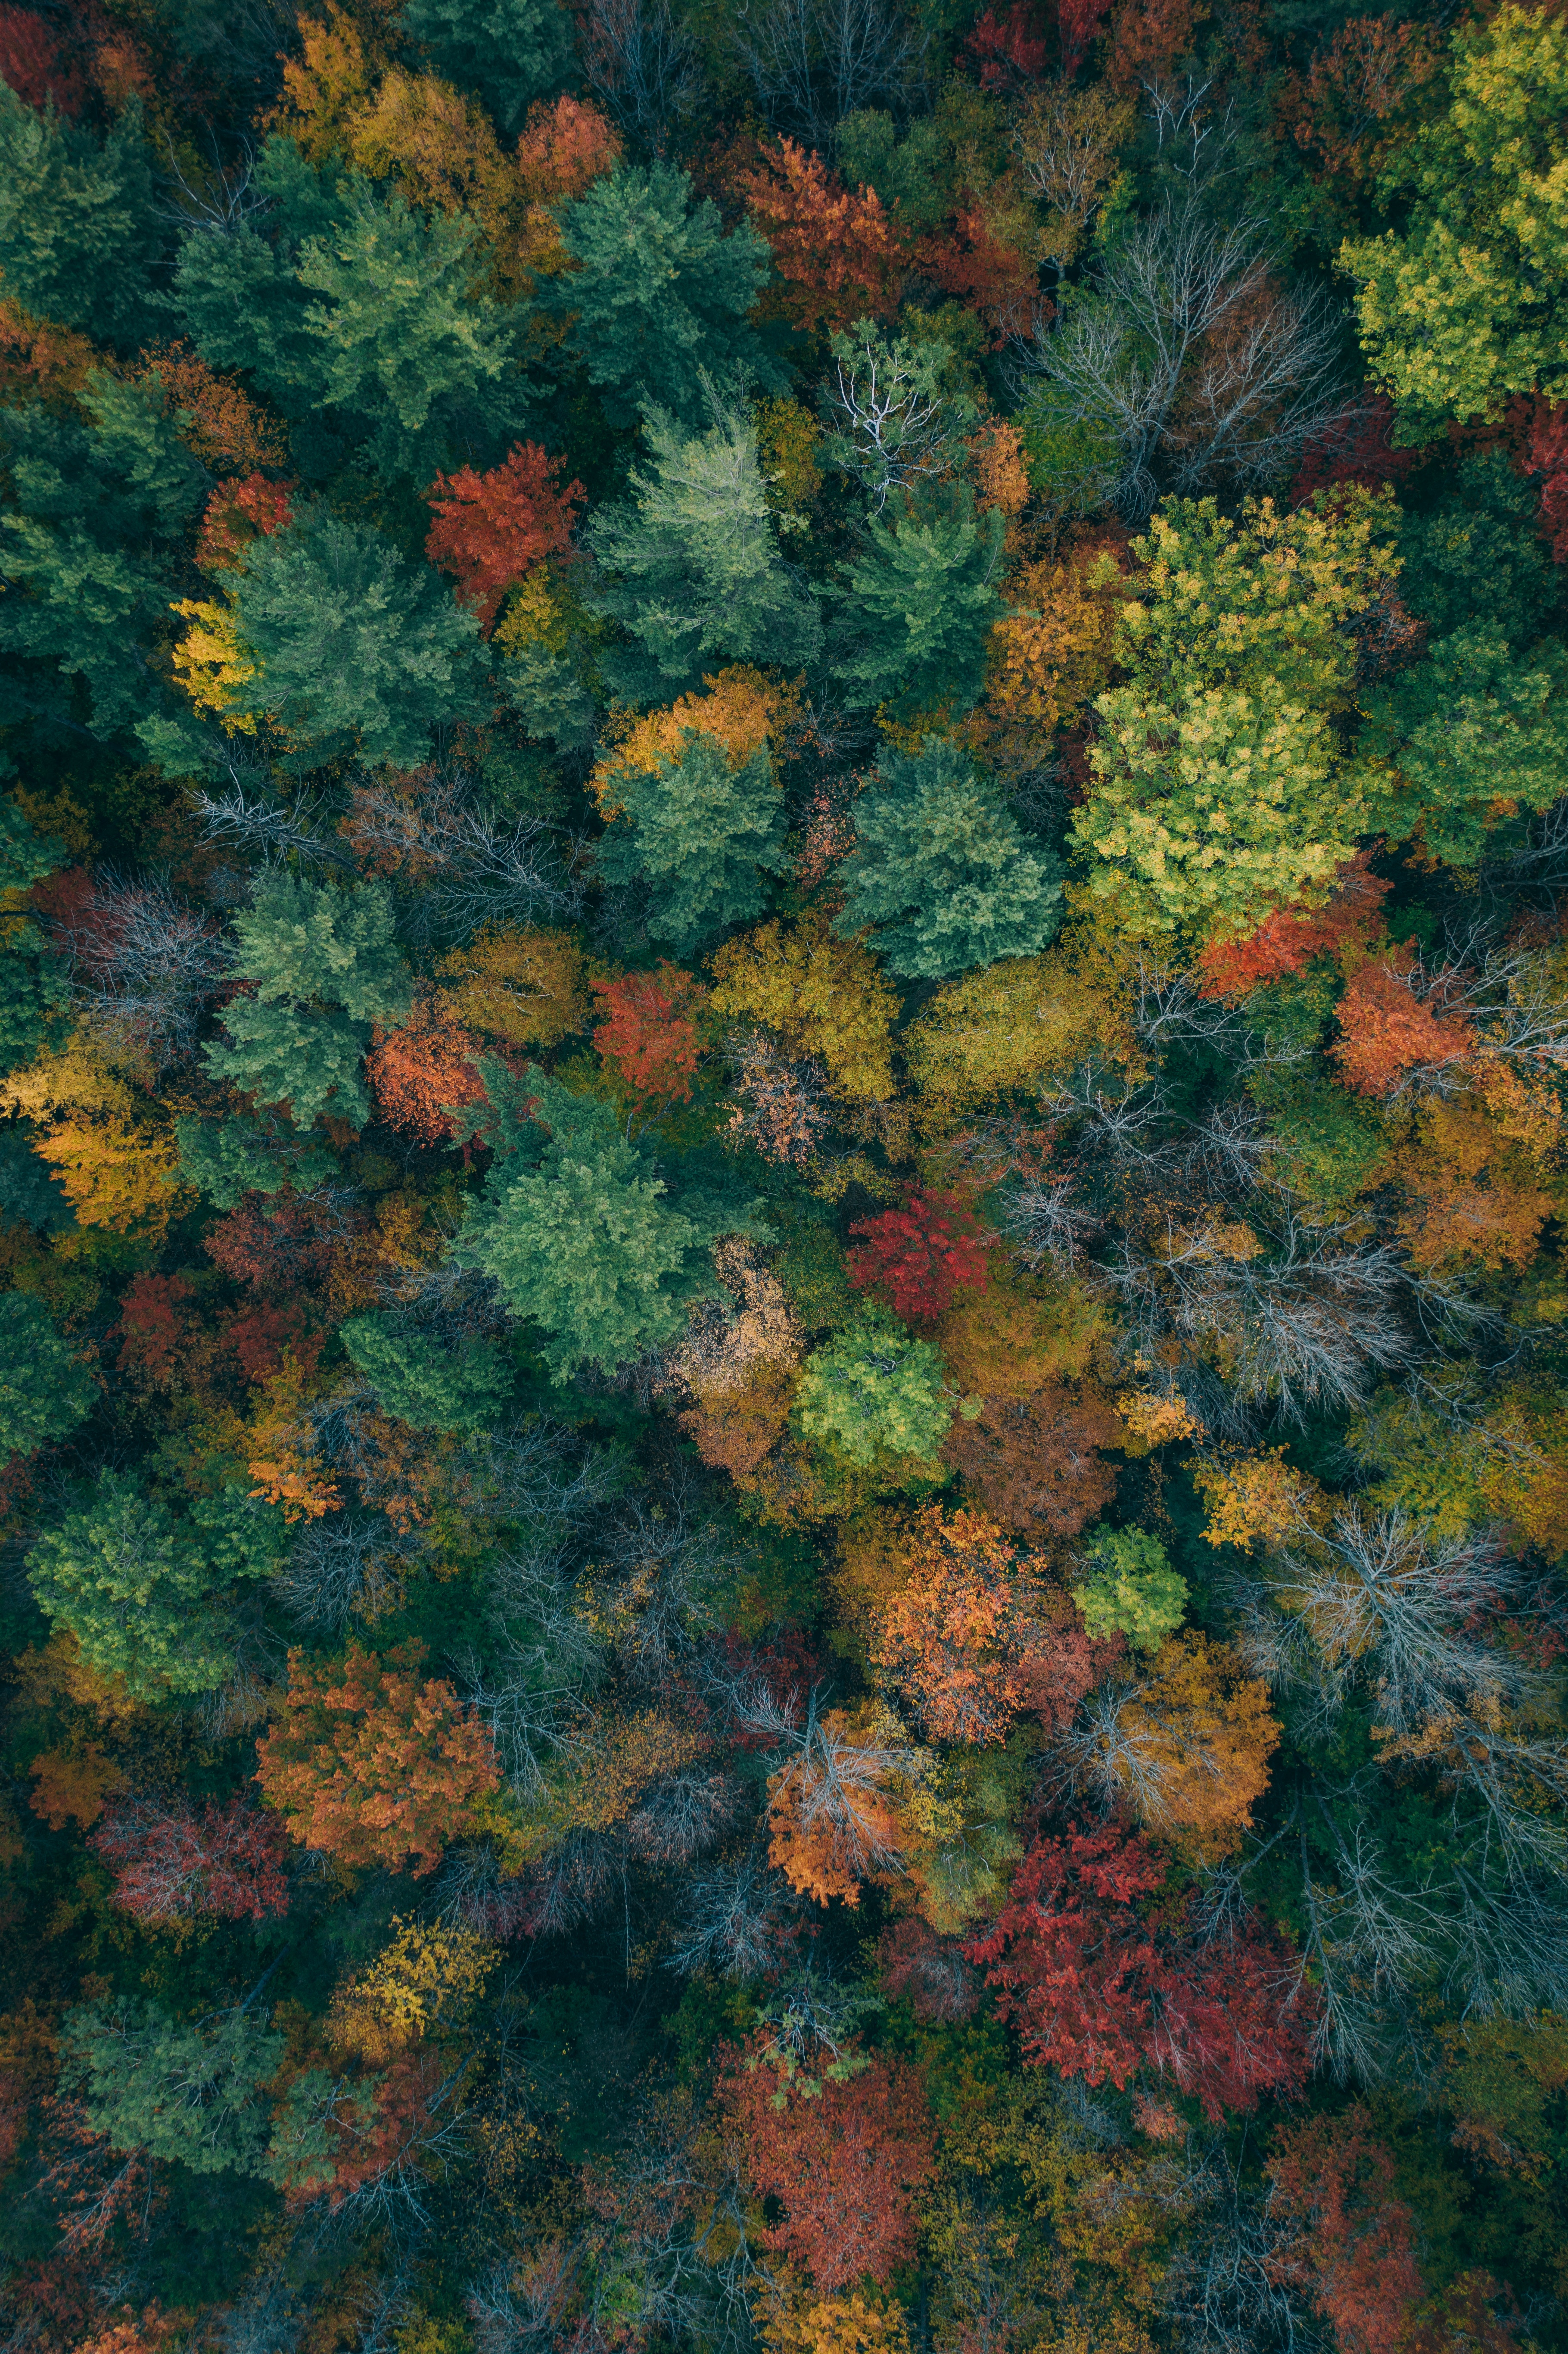 forest, colorful, autumn paints, nature, autumn colors, autumn, trees, view from above, colourful wallpaper for mobile